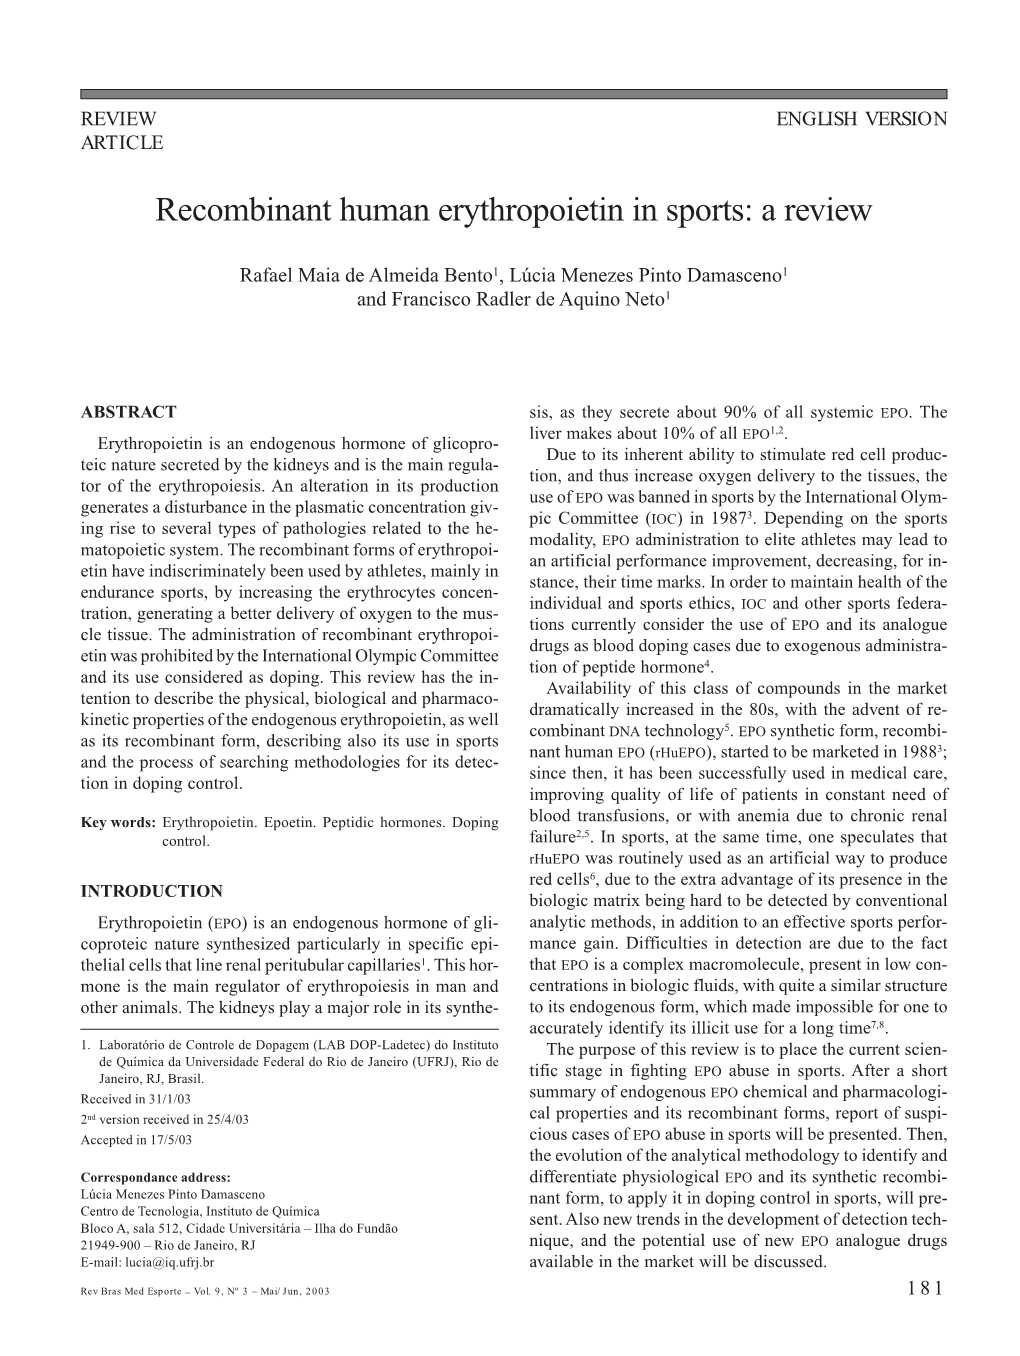 Recombinant Human Erythropoietin in Sports: a Review